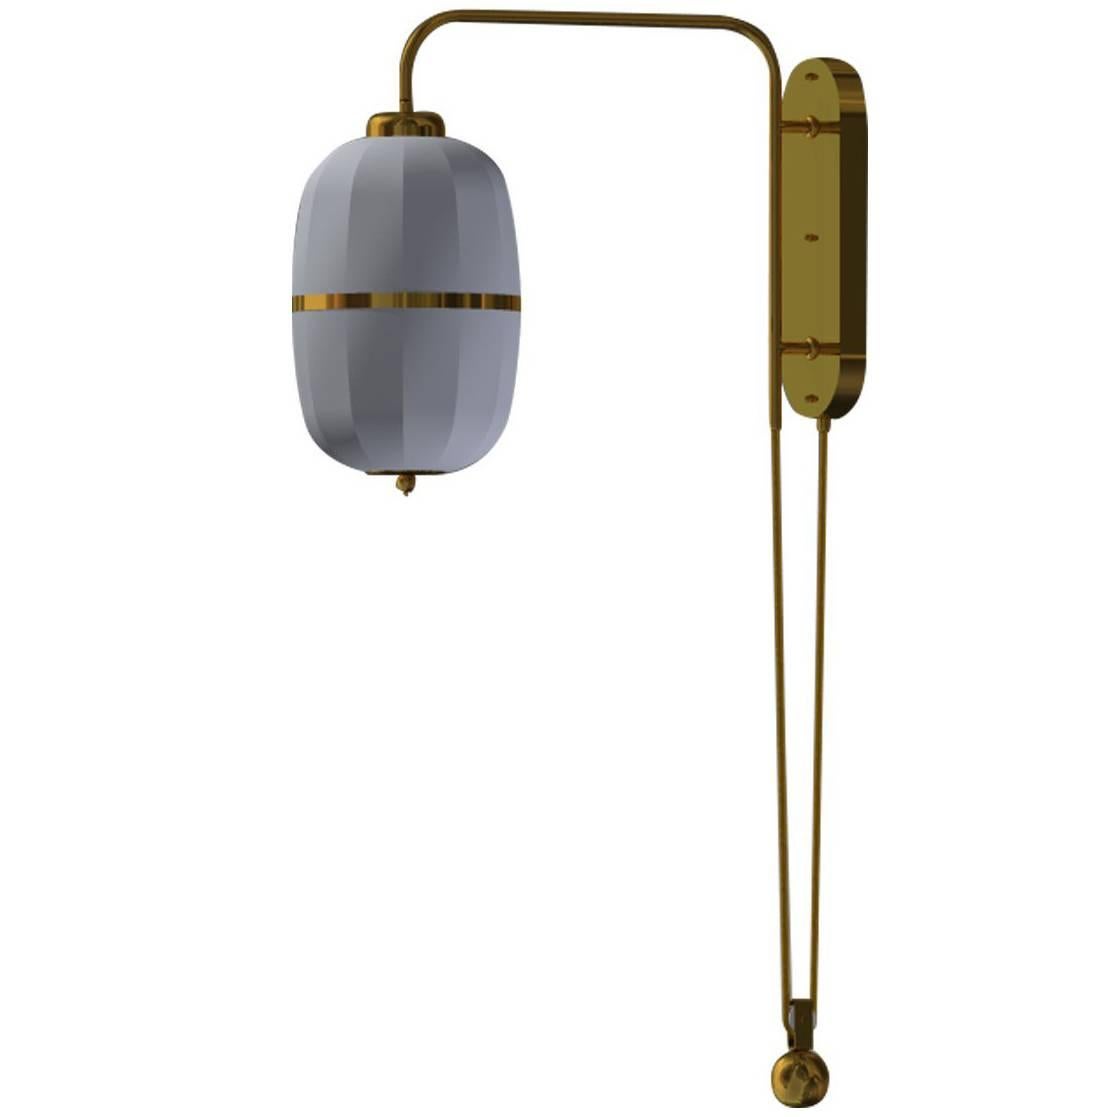 Extraordinary wall-lamp with a pulley, measures up to the clients request. Comes as well with no pulley.
Different kind of shades are available
Most components according to the UL regulations, with an additional charge we will UL-list and label